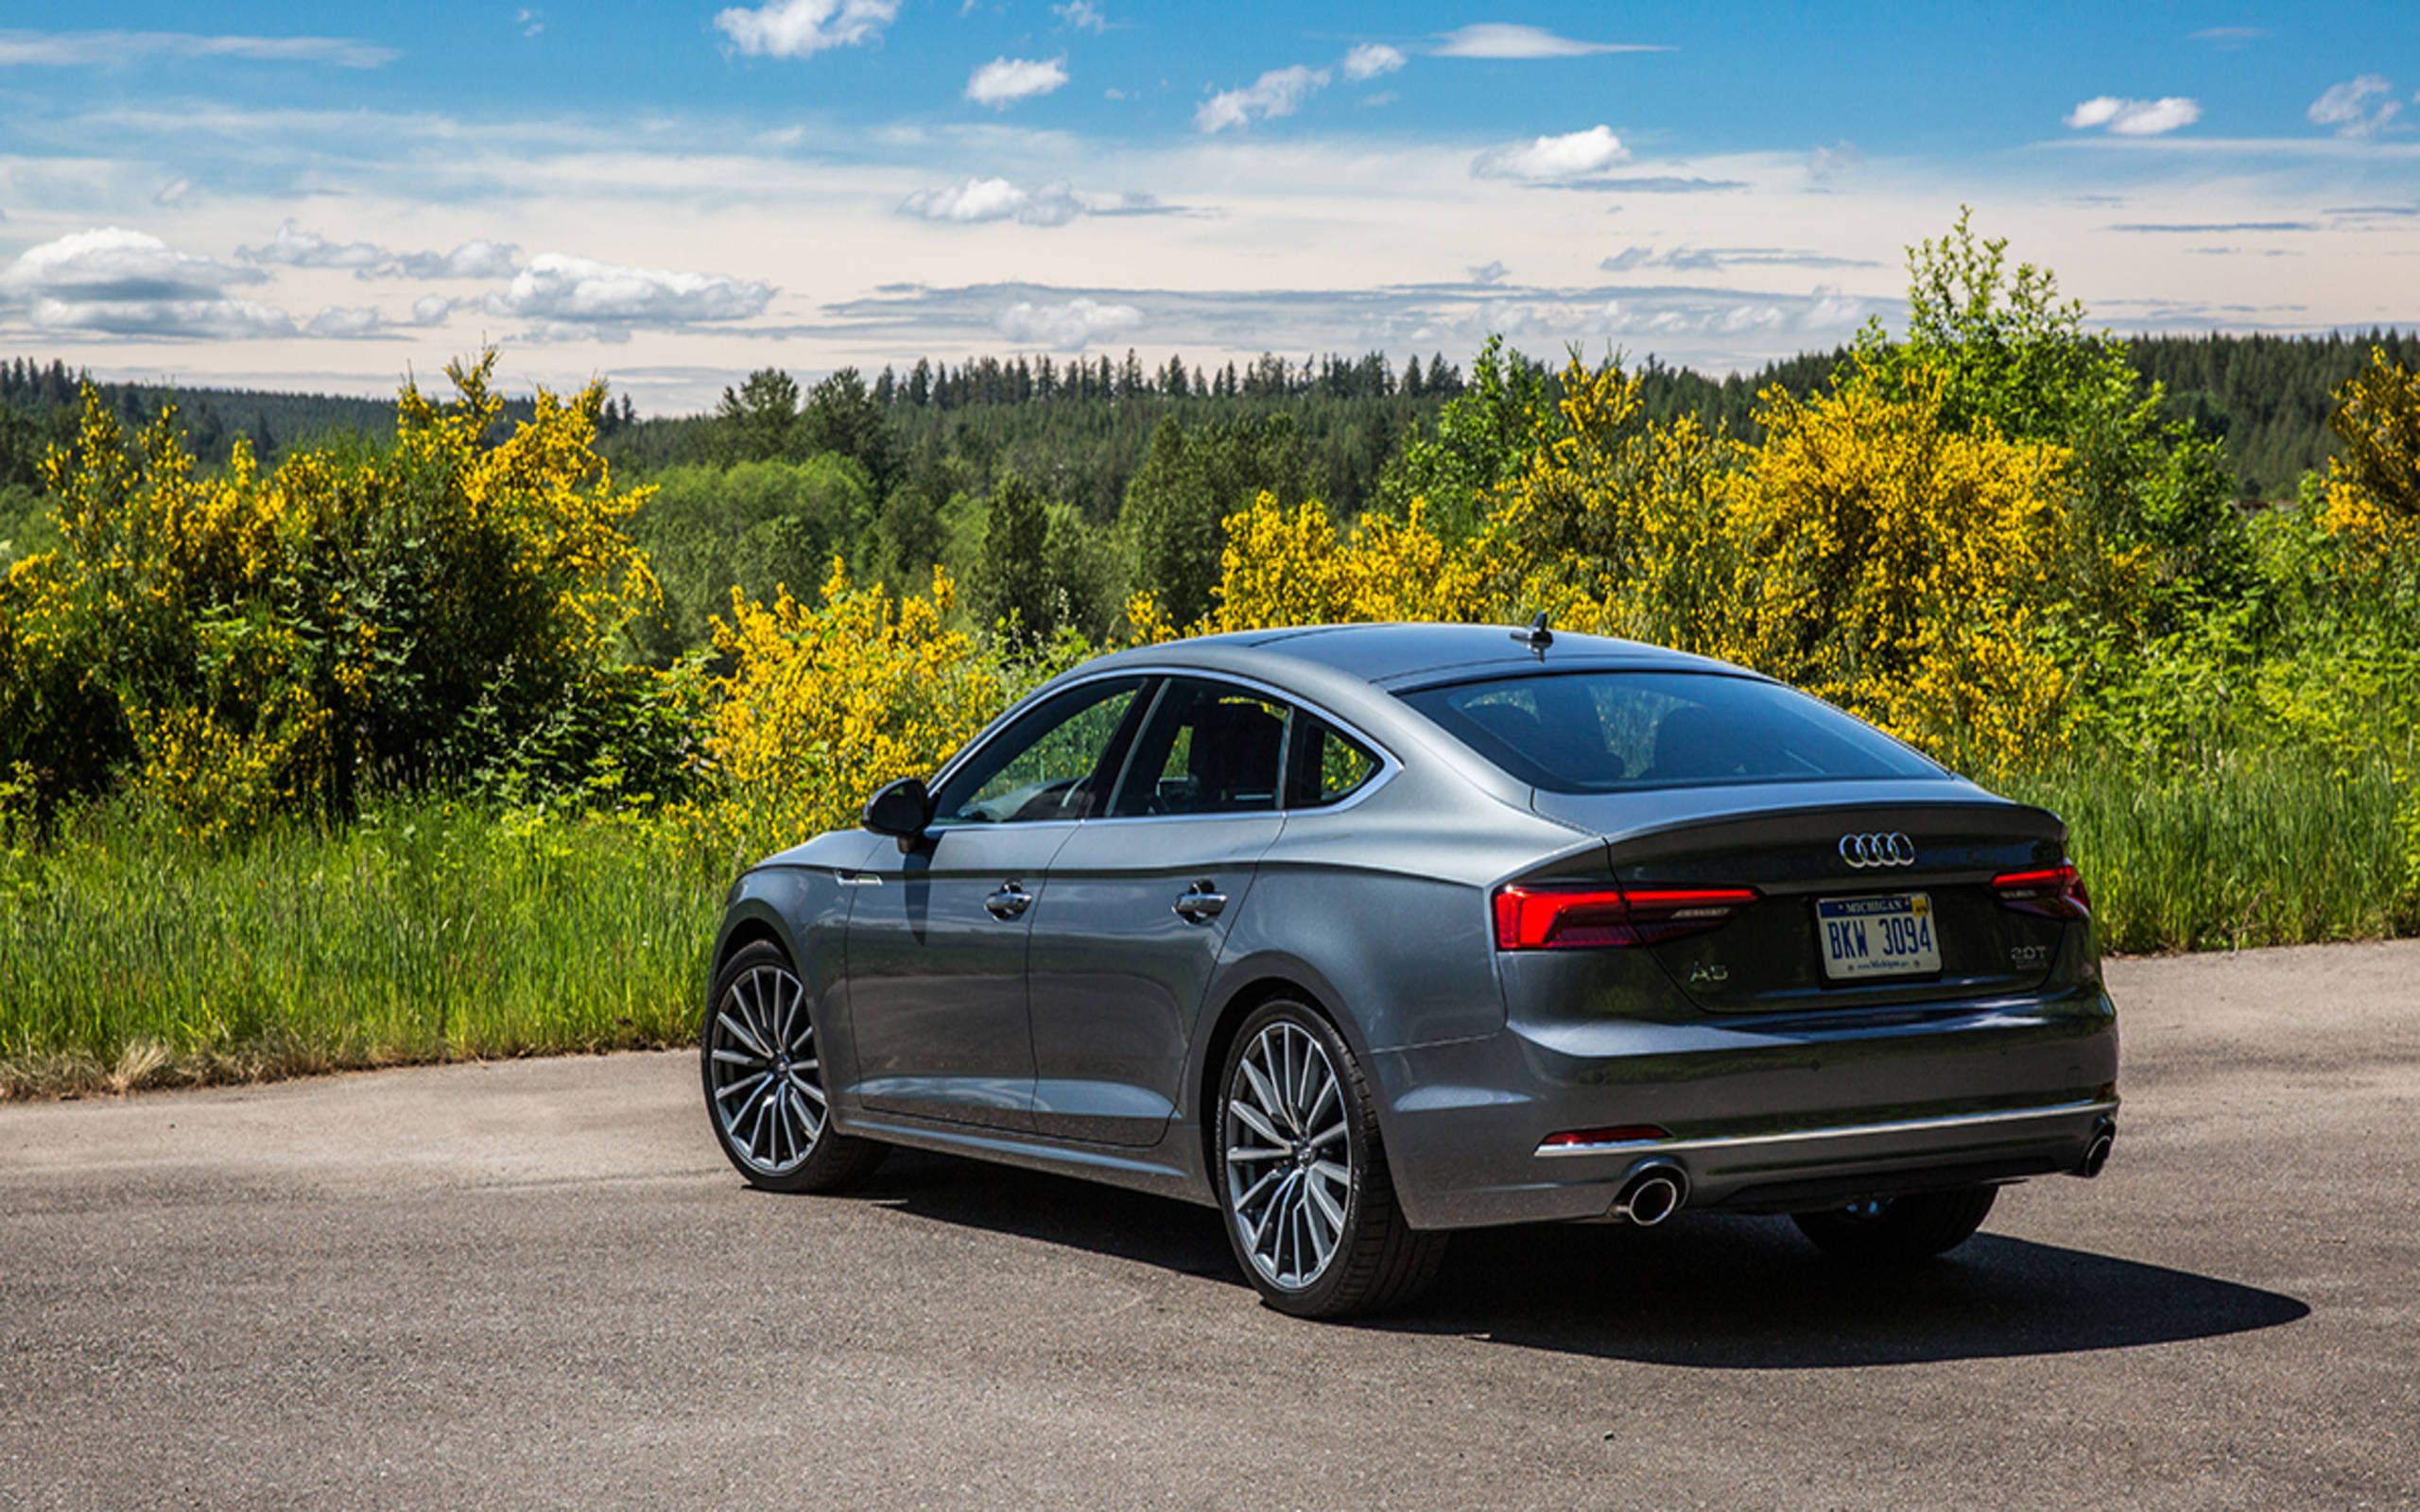 2018 Audi A5 Sportback review: The best of all worlds - CNET